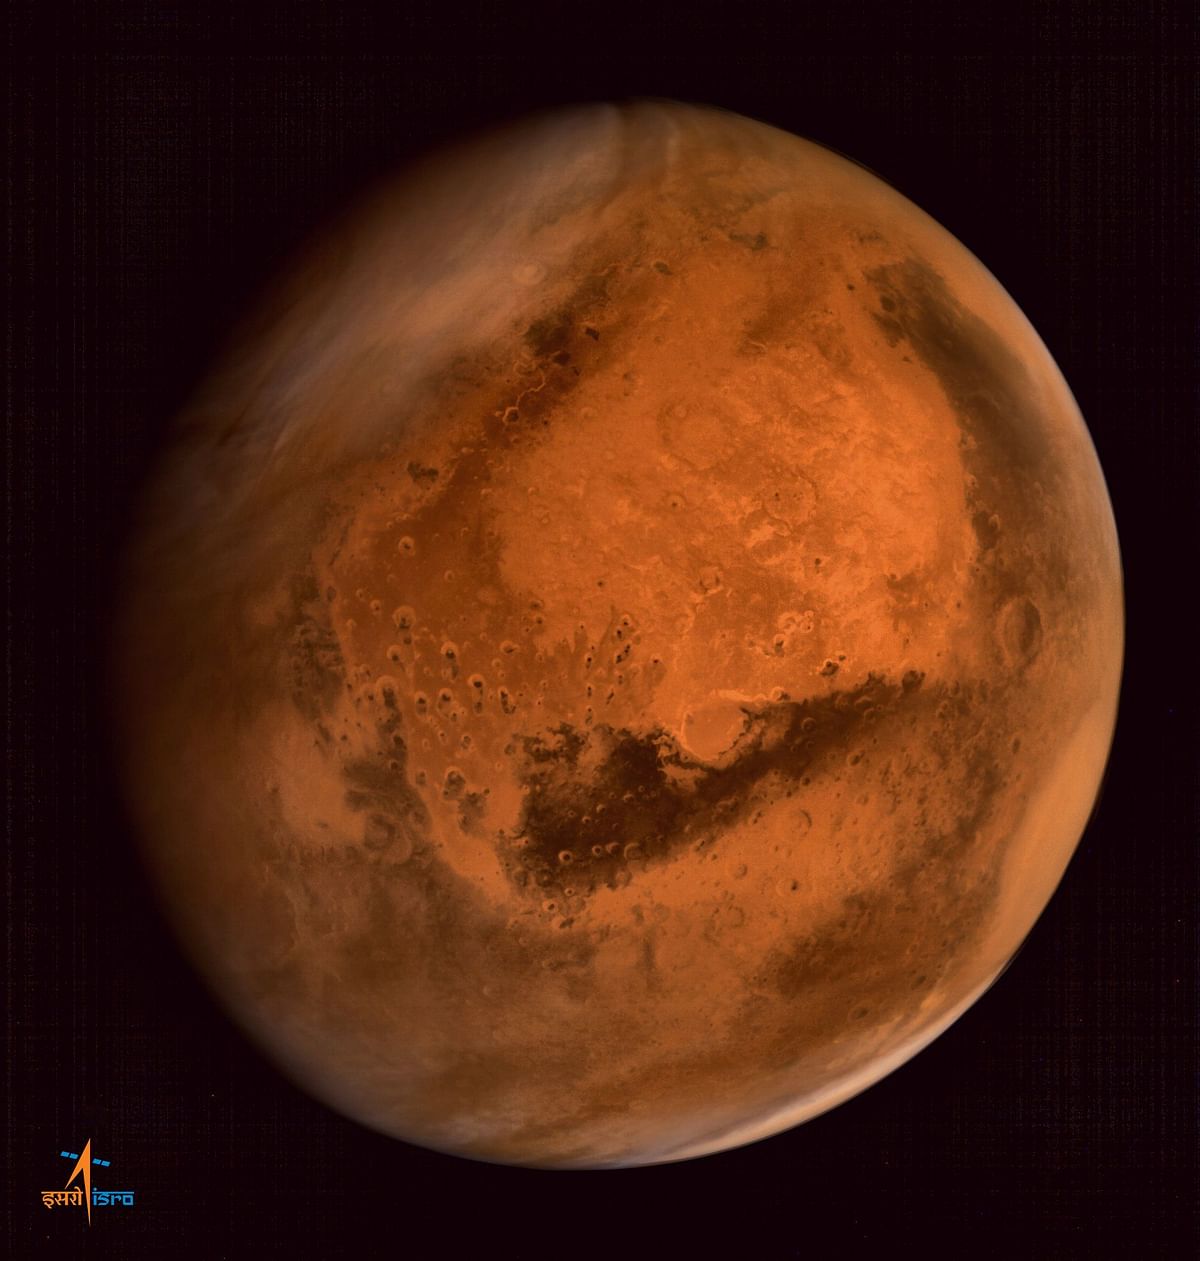 Ever wonder about existence beyond Earth? Here are 3 great mysteries about life on Mars